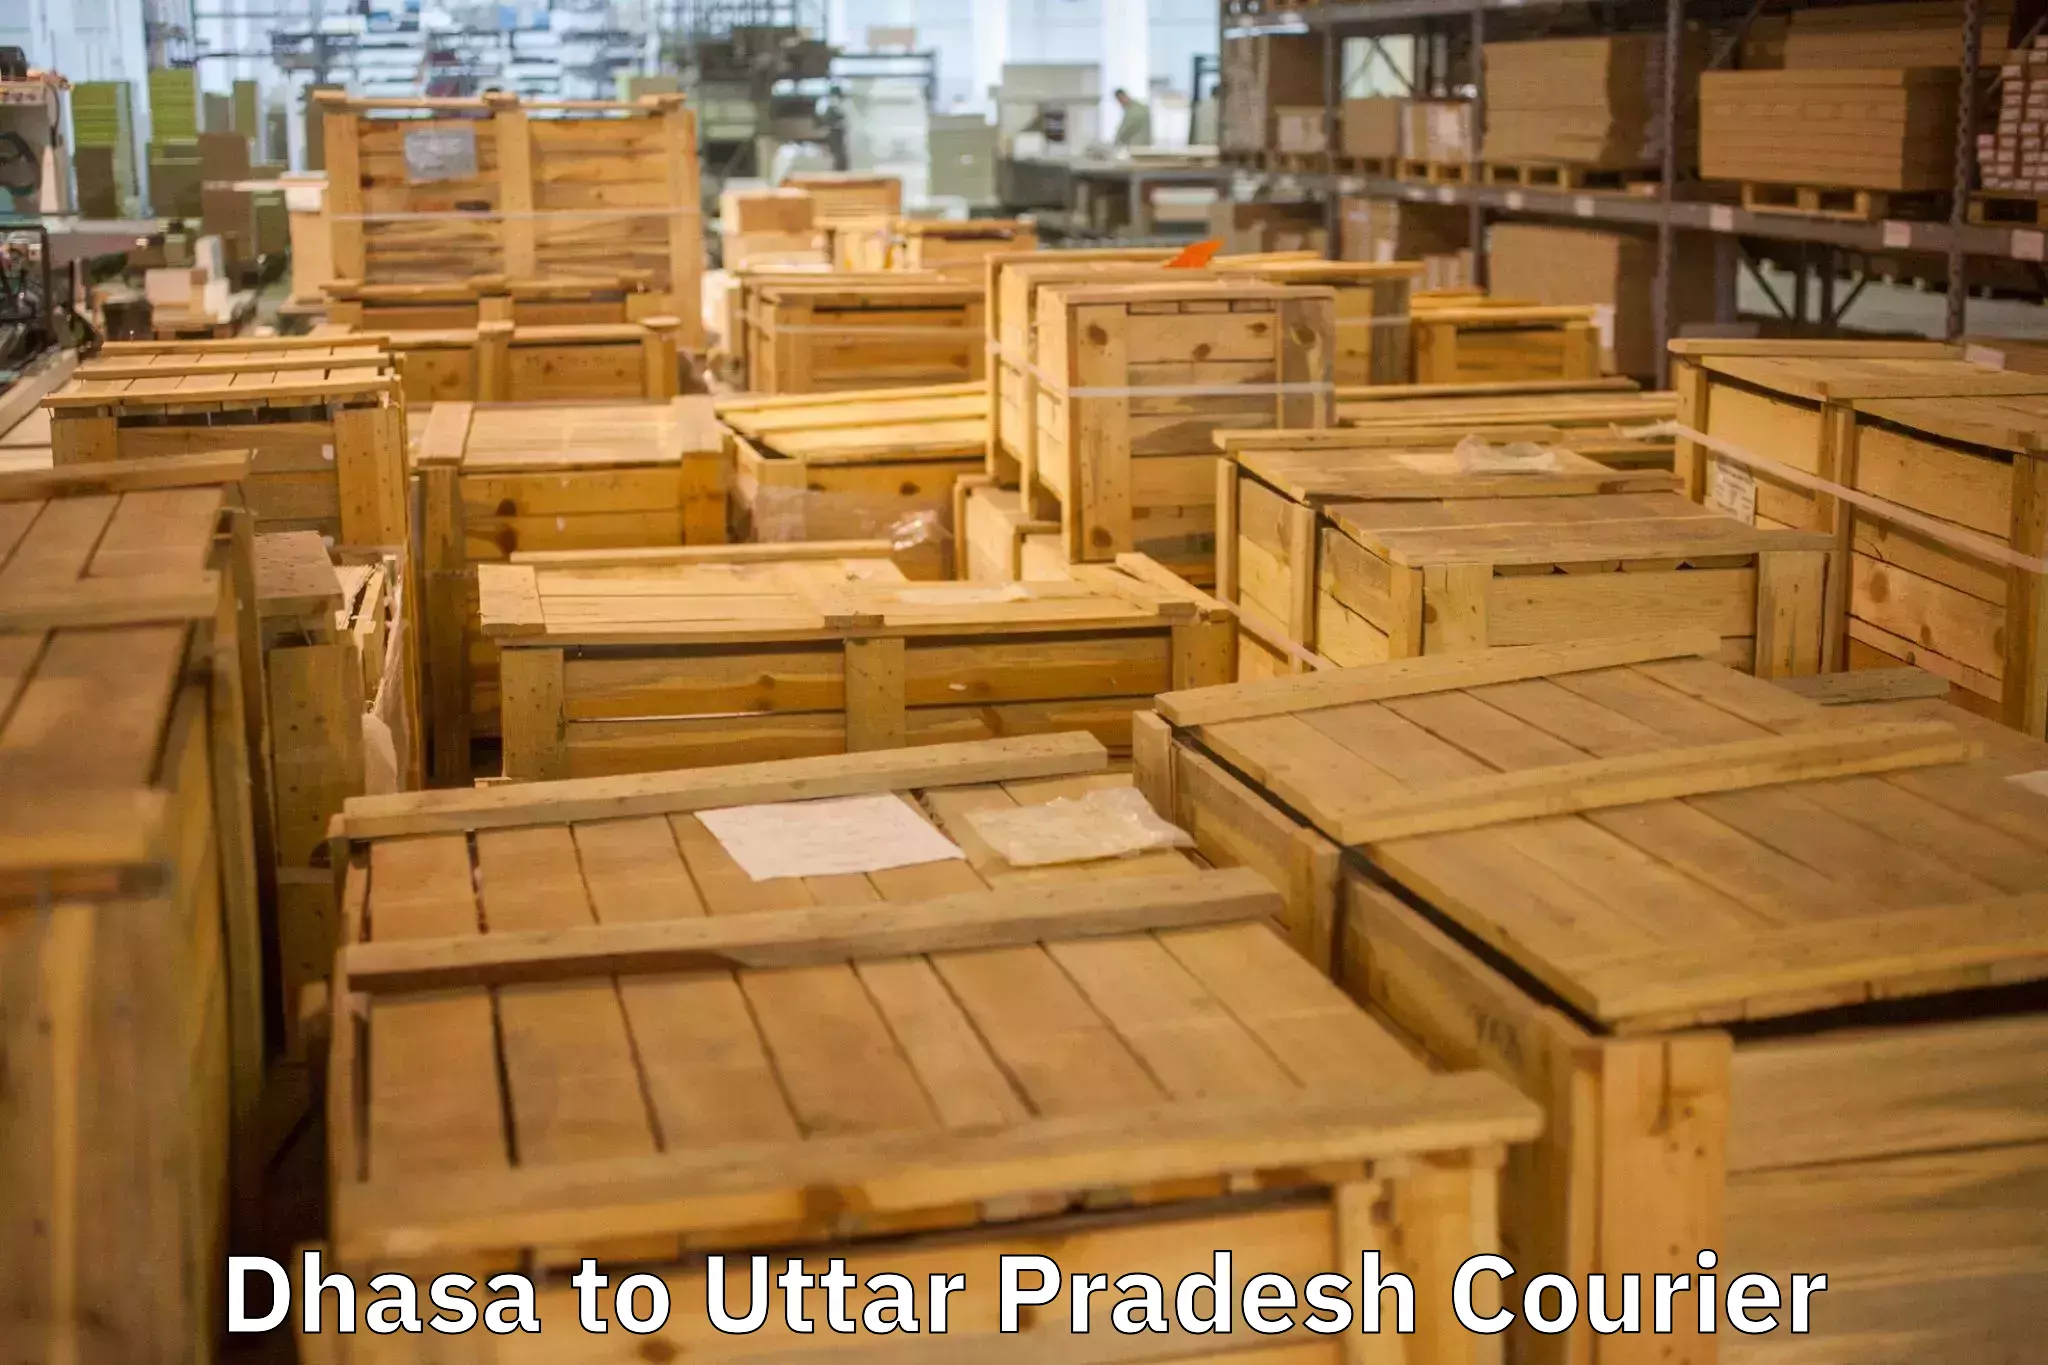 Full-service movers in Dhasa to Agra